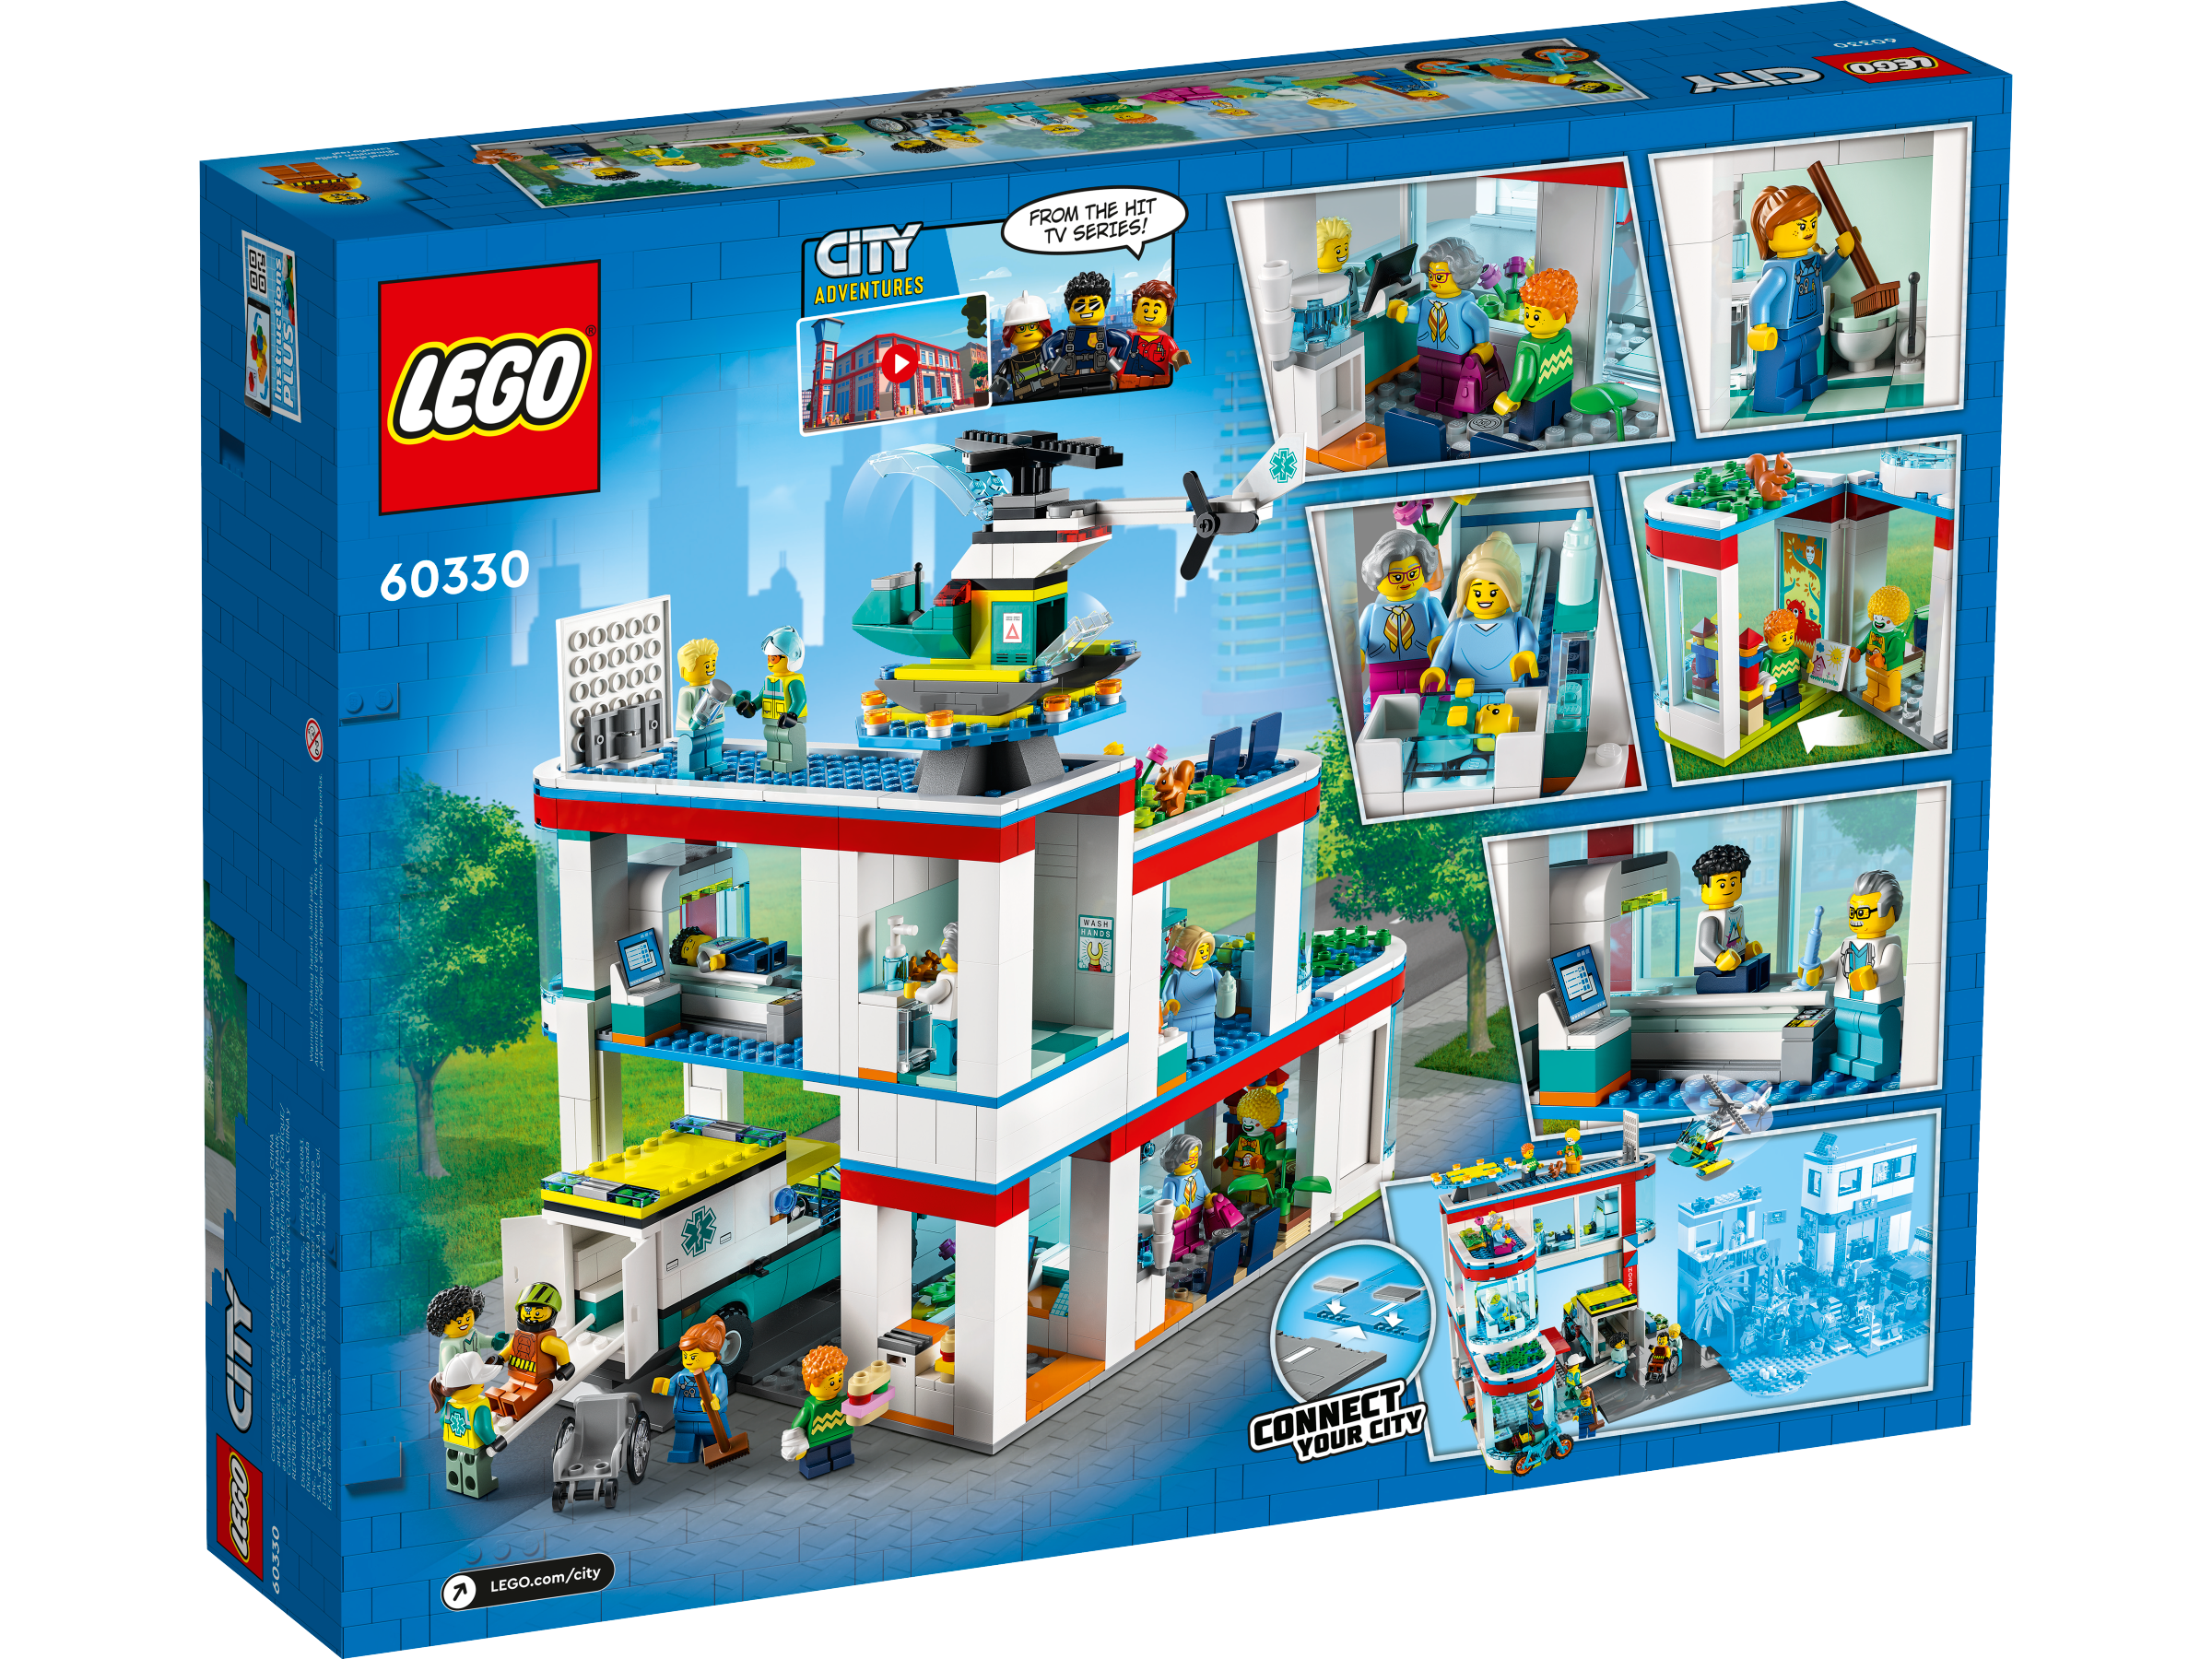 Hospital 60330 | City | Buy online at the Official LEGO® Shop US